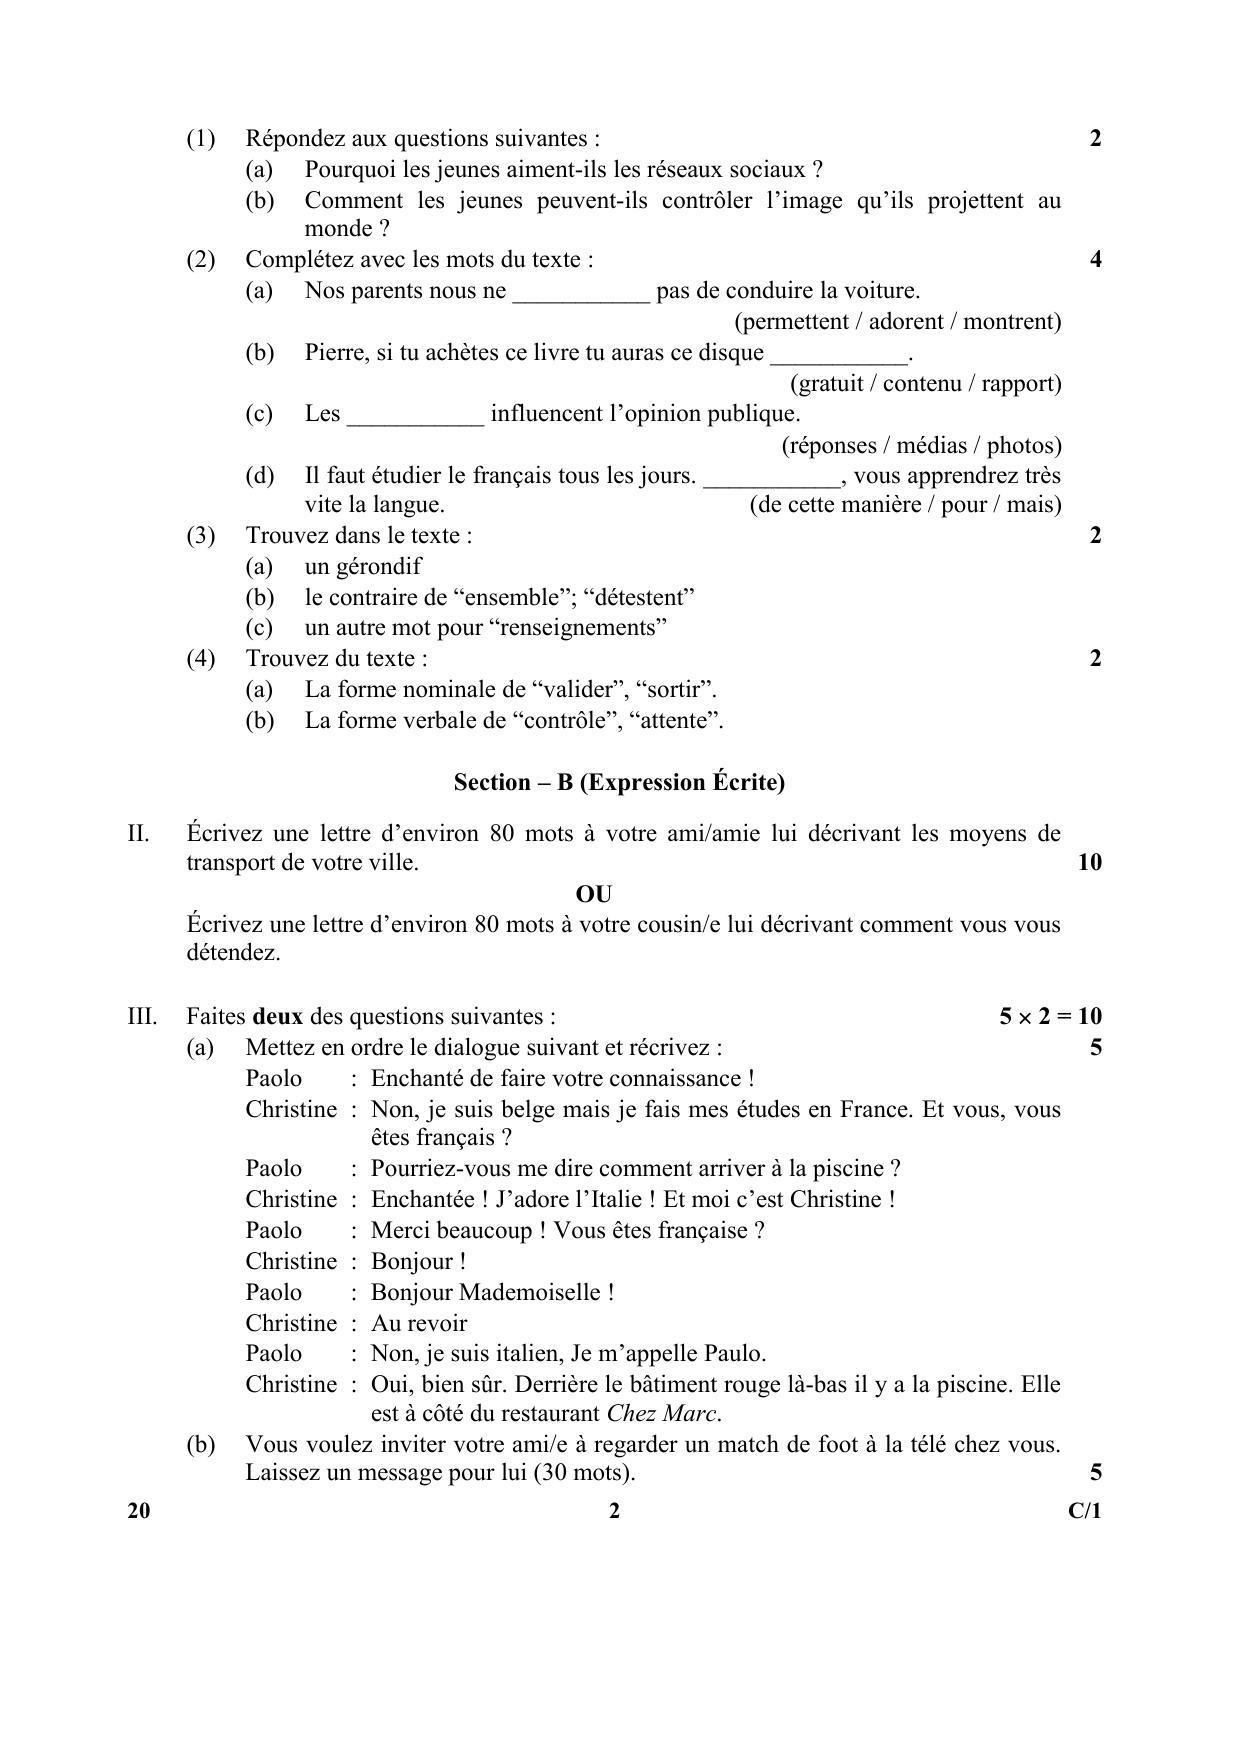 CBSE Class 10 20 (French) 2018 Compartment Question Paper - Page 2